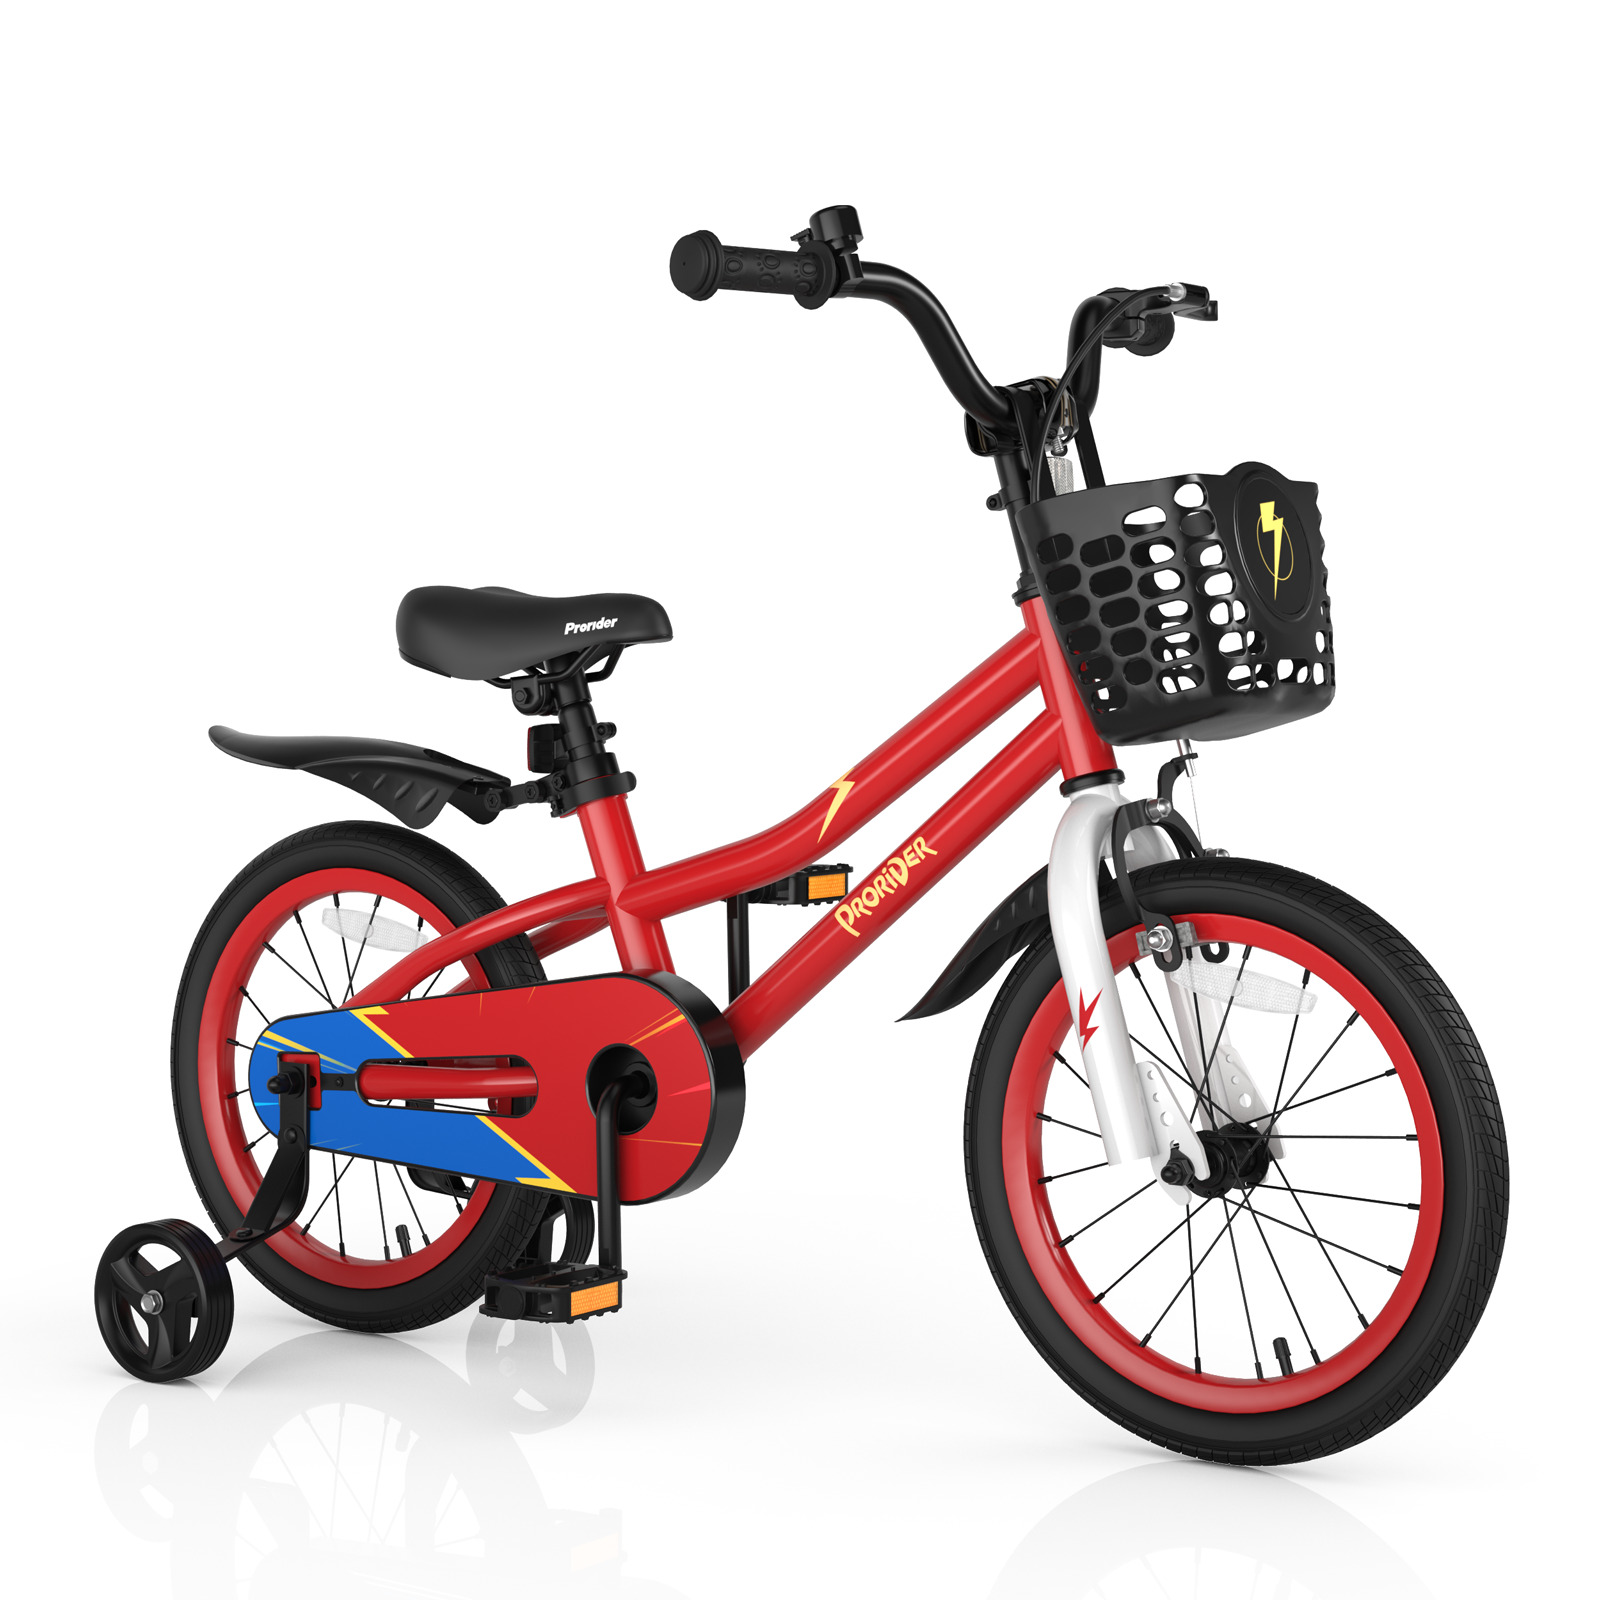 Kid’s 16" Bike w/Removable Training Wheels & Basket for 4-7 Years Old Red